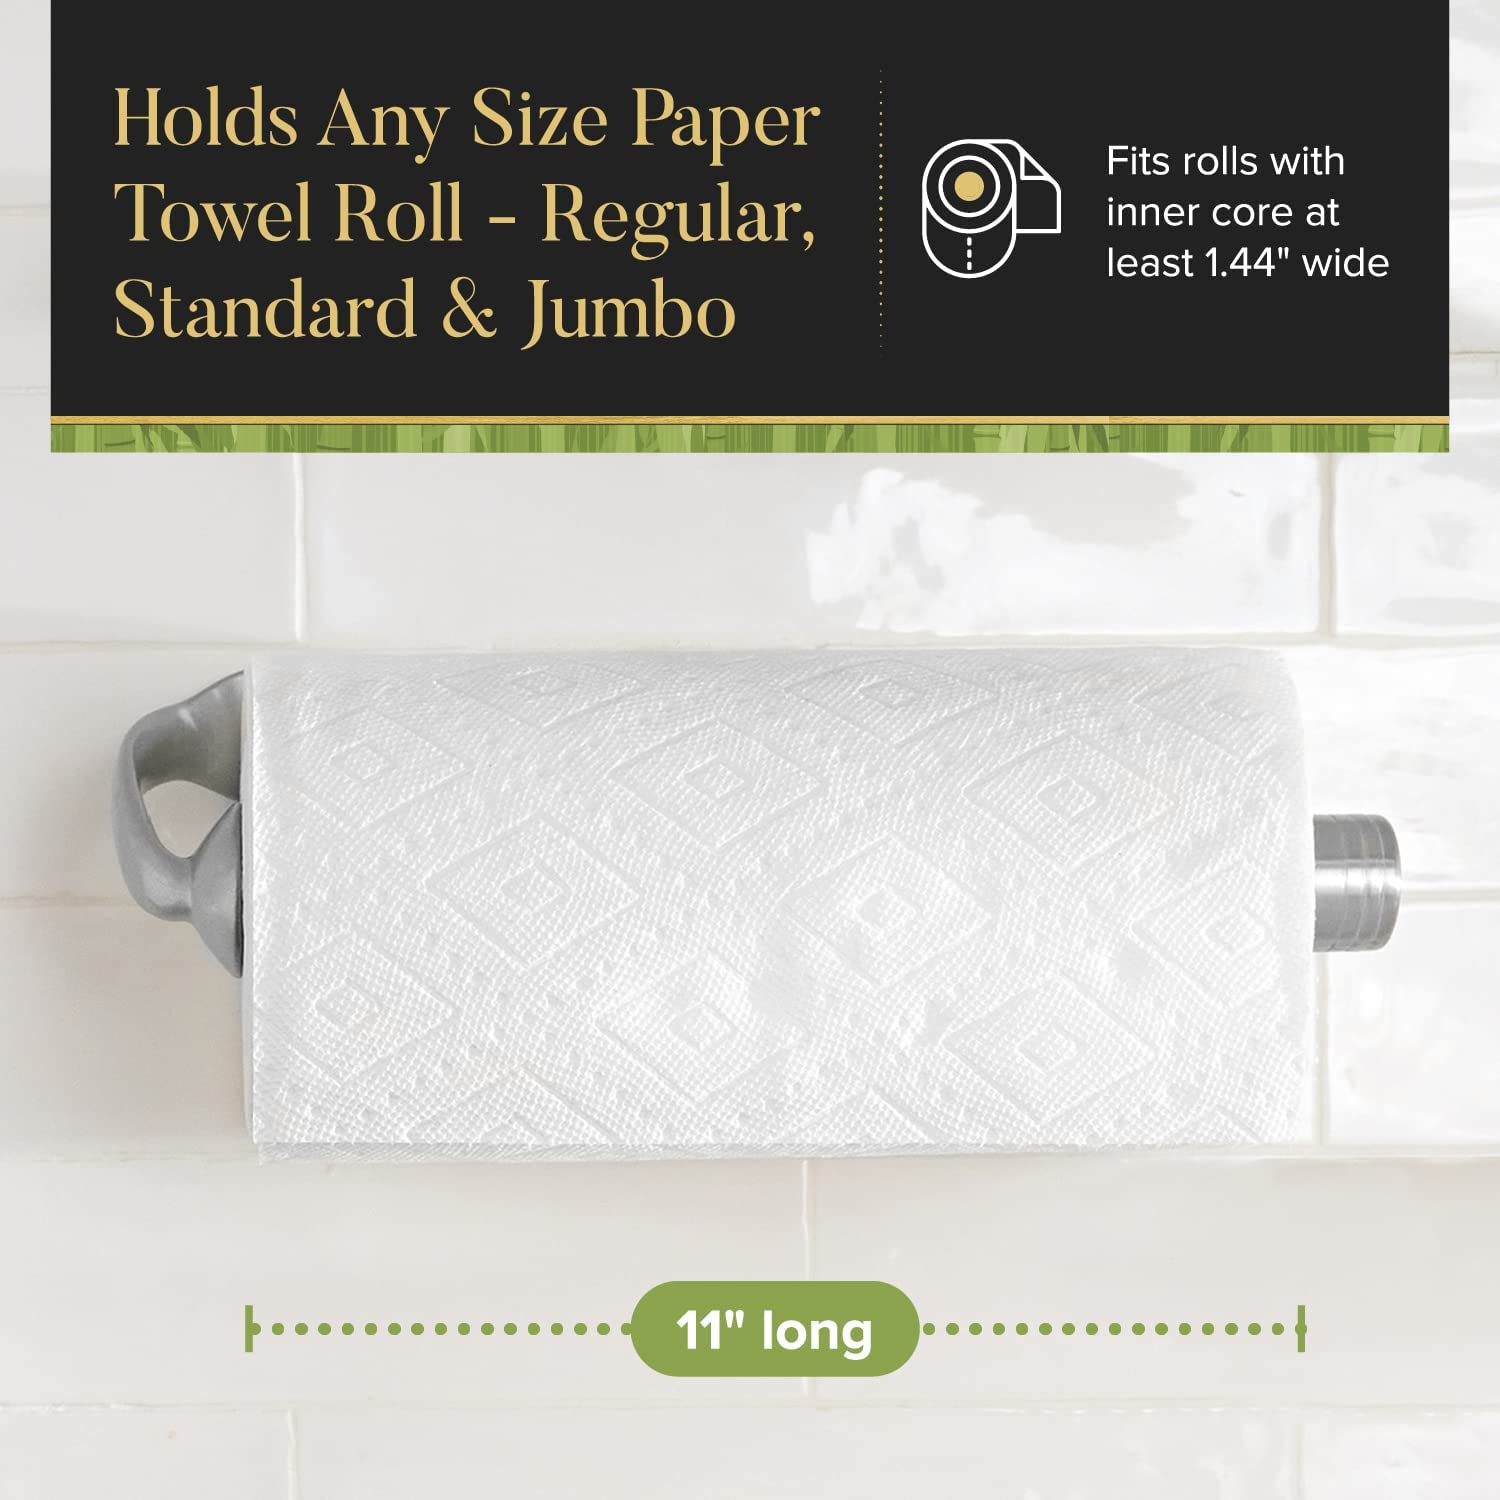 Dear Household Stainless Steel Black Paper Towel Holder Designed for Easy One-Handed Operation - This Sturdy Weighted Paper Towel Dispenser Countertop